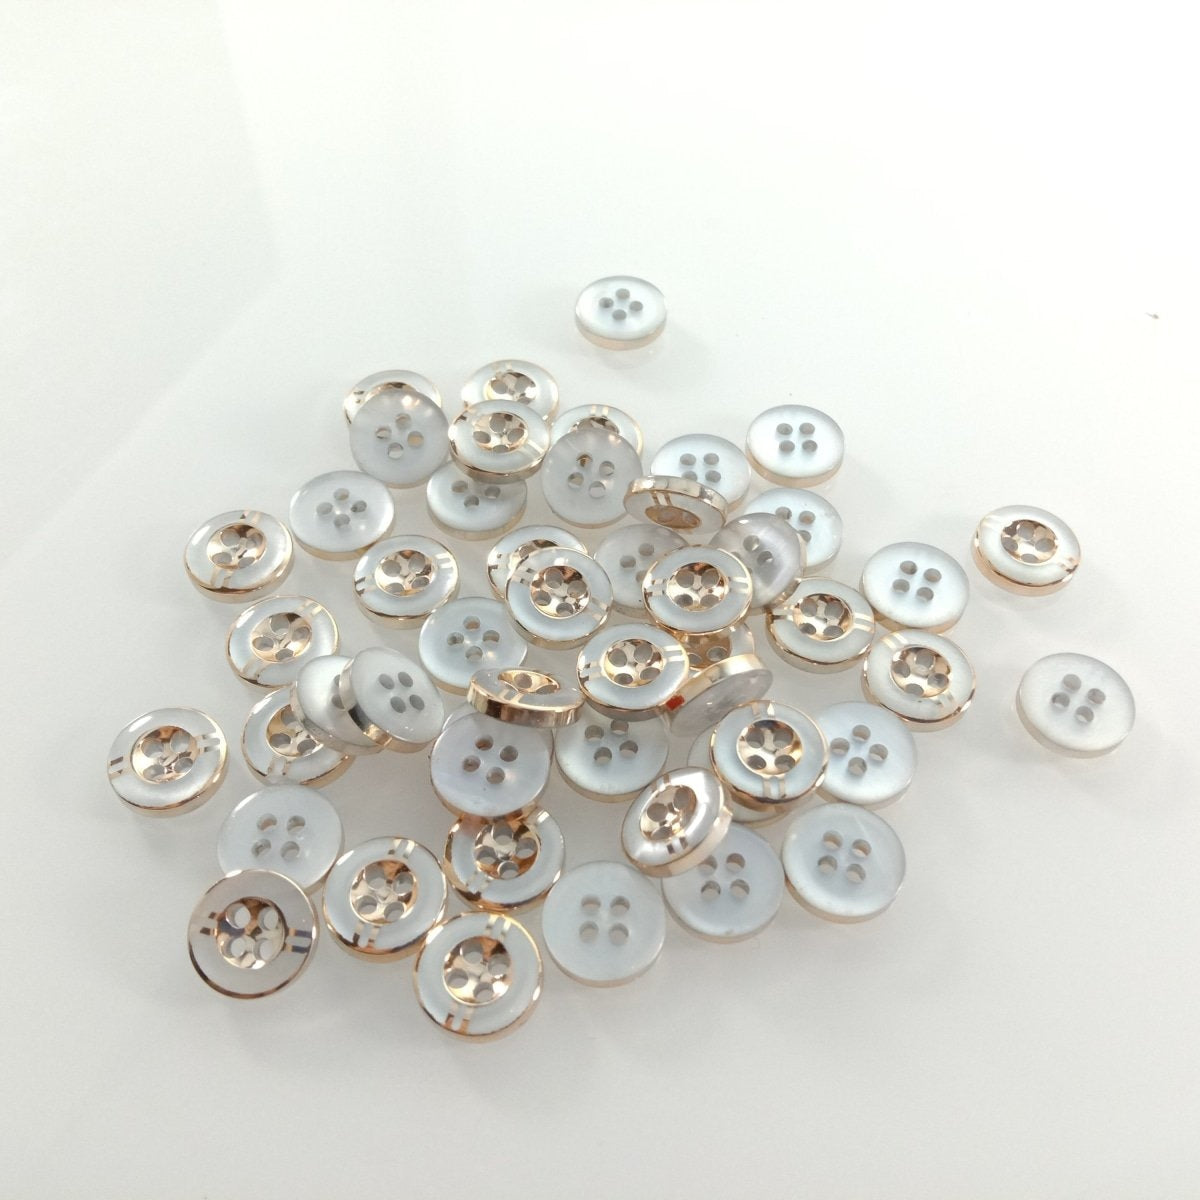 50Pcs 11Mm 4 Holes Resin Buttons Shirt Apparel Sewing Accessories Diy Crafts Clothing